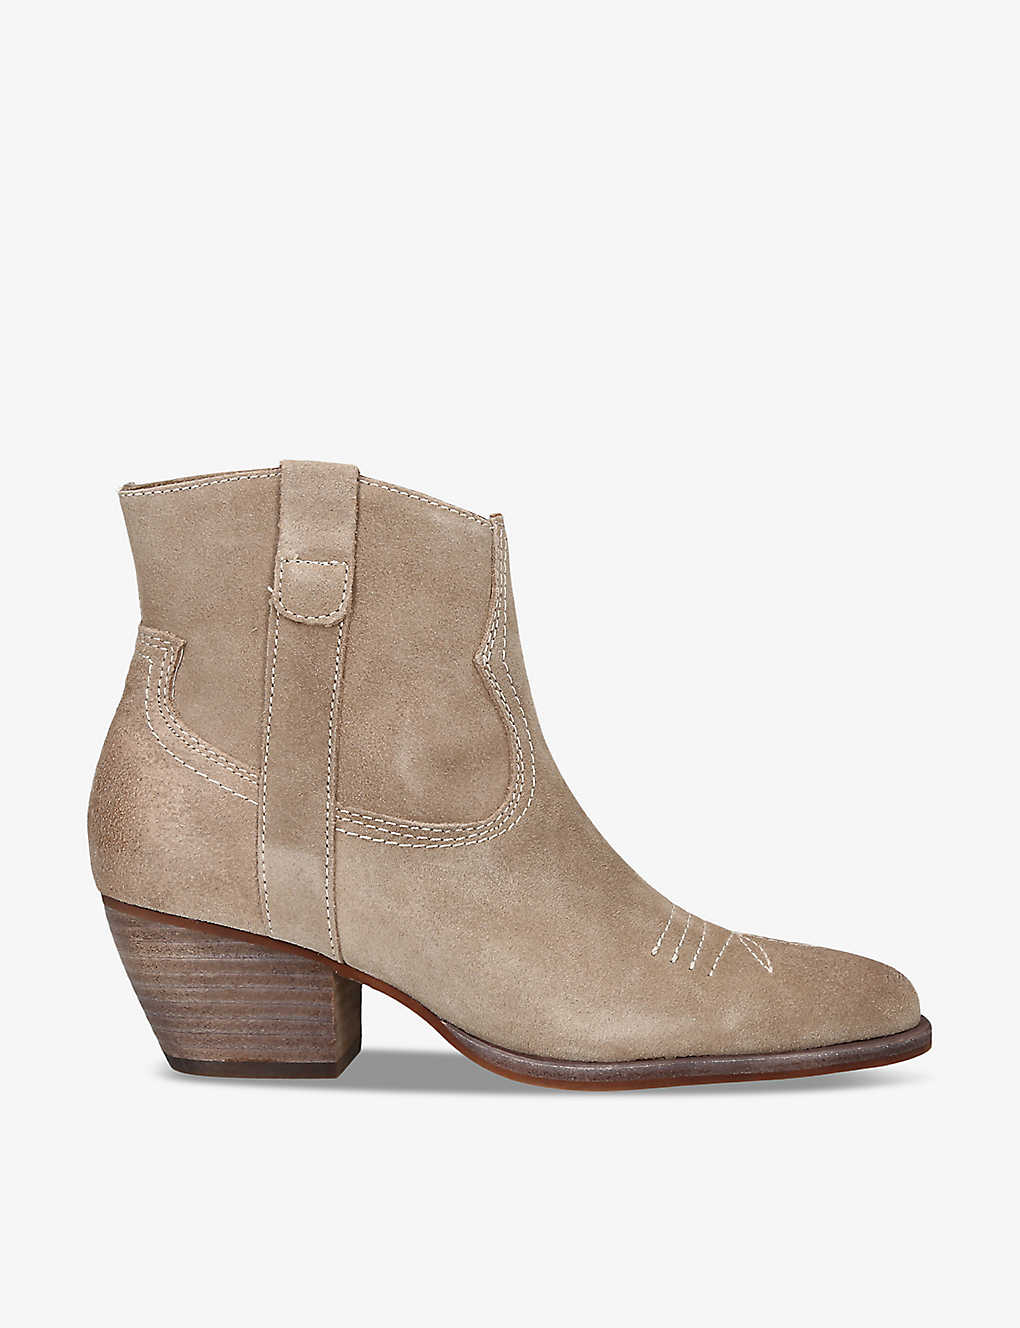 Dolce Vita Womens Tan Silma Contrast-stitch Suede Heeled Ankle Boots